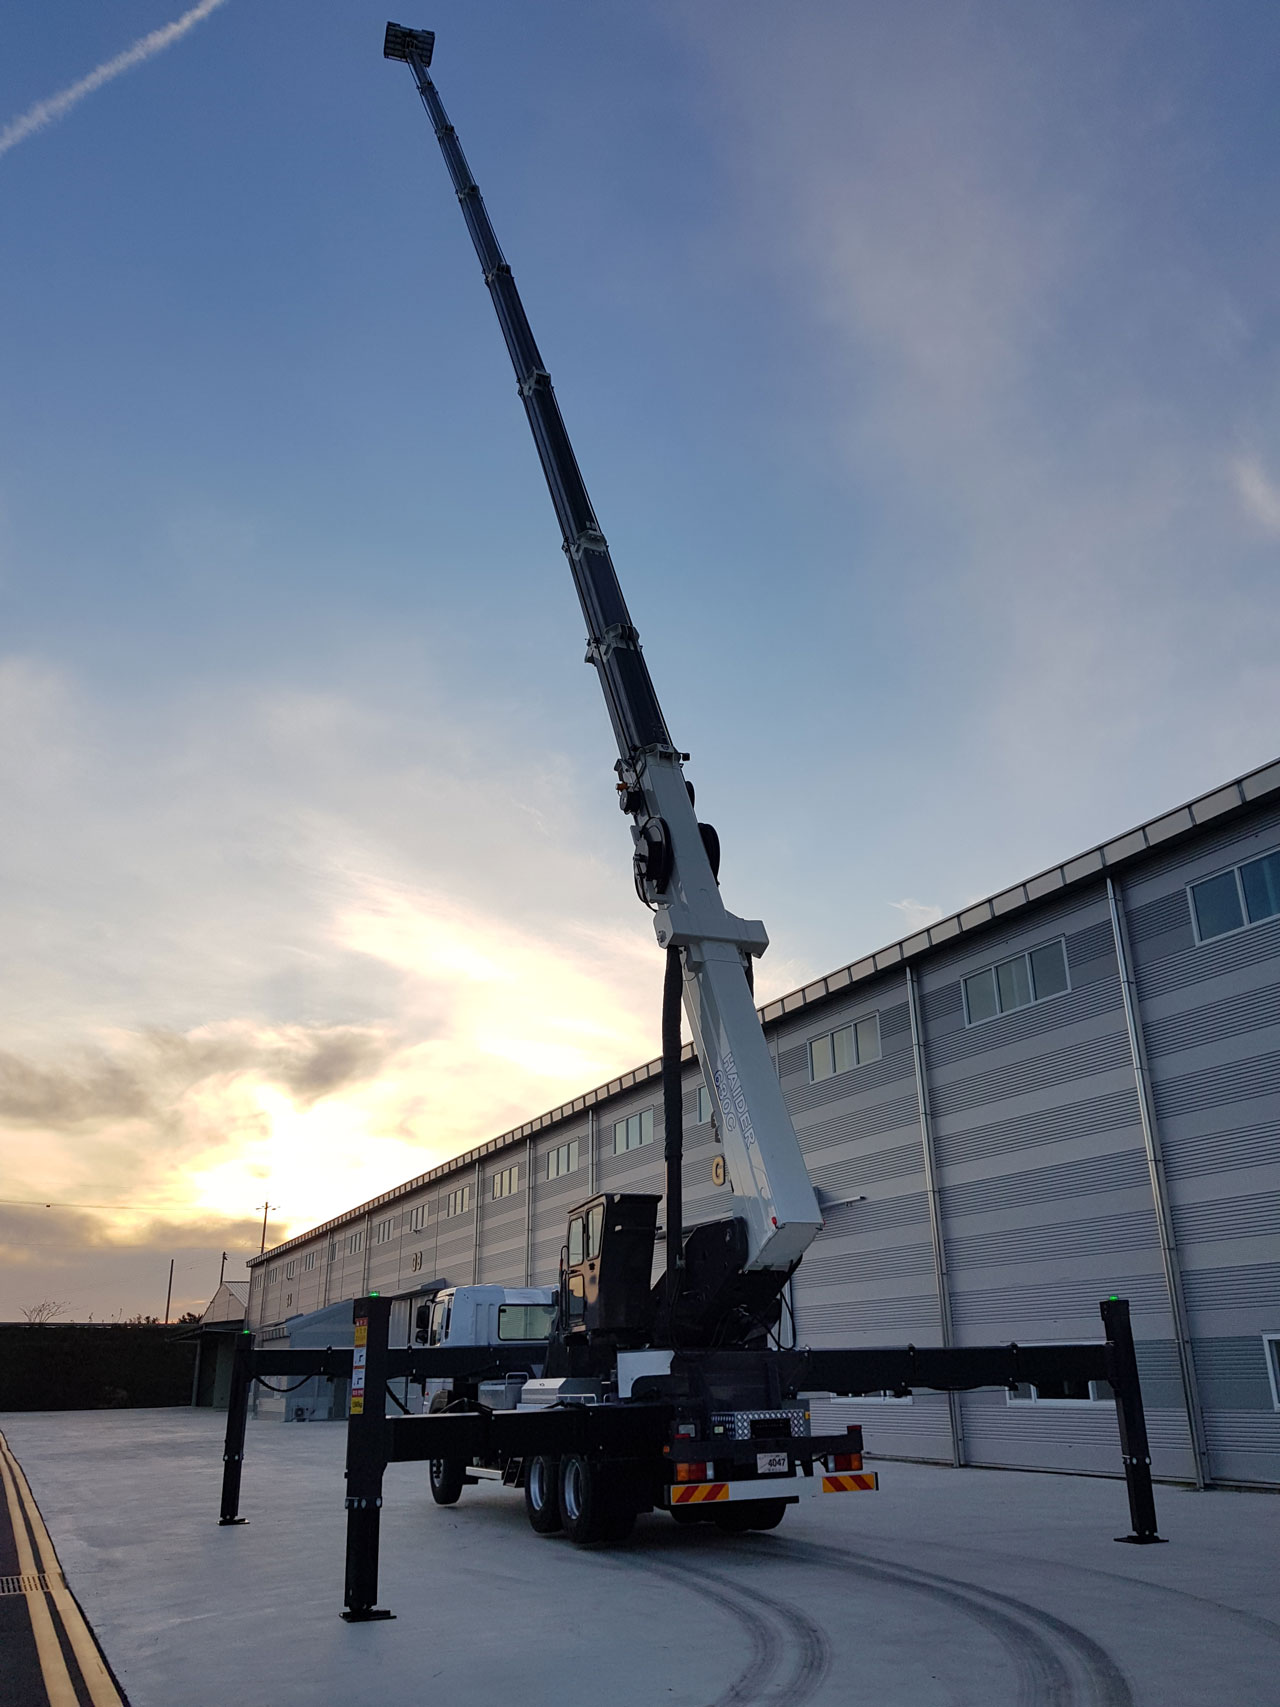 Huge spider lift reaching up to the sky at sunset, with strong yet light boom made in Strenx® 960 Plus steel.